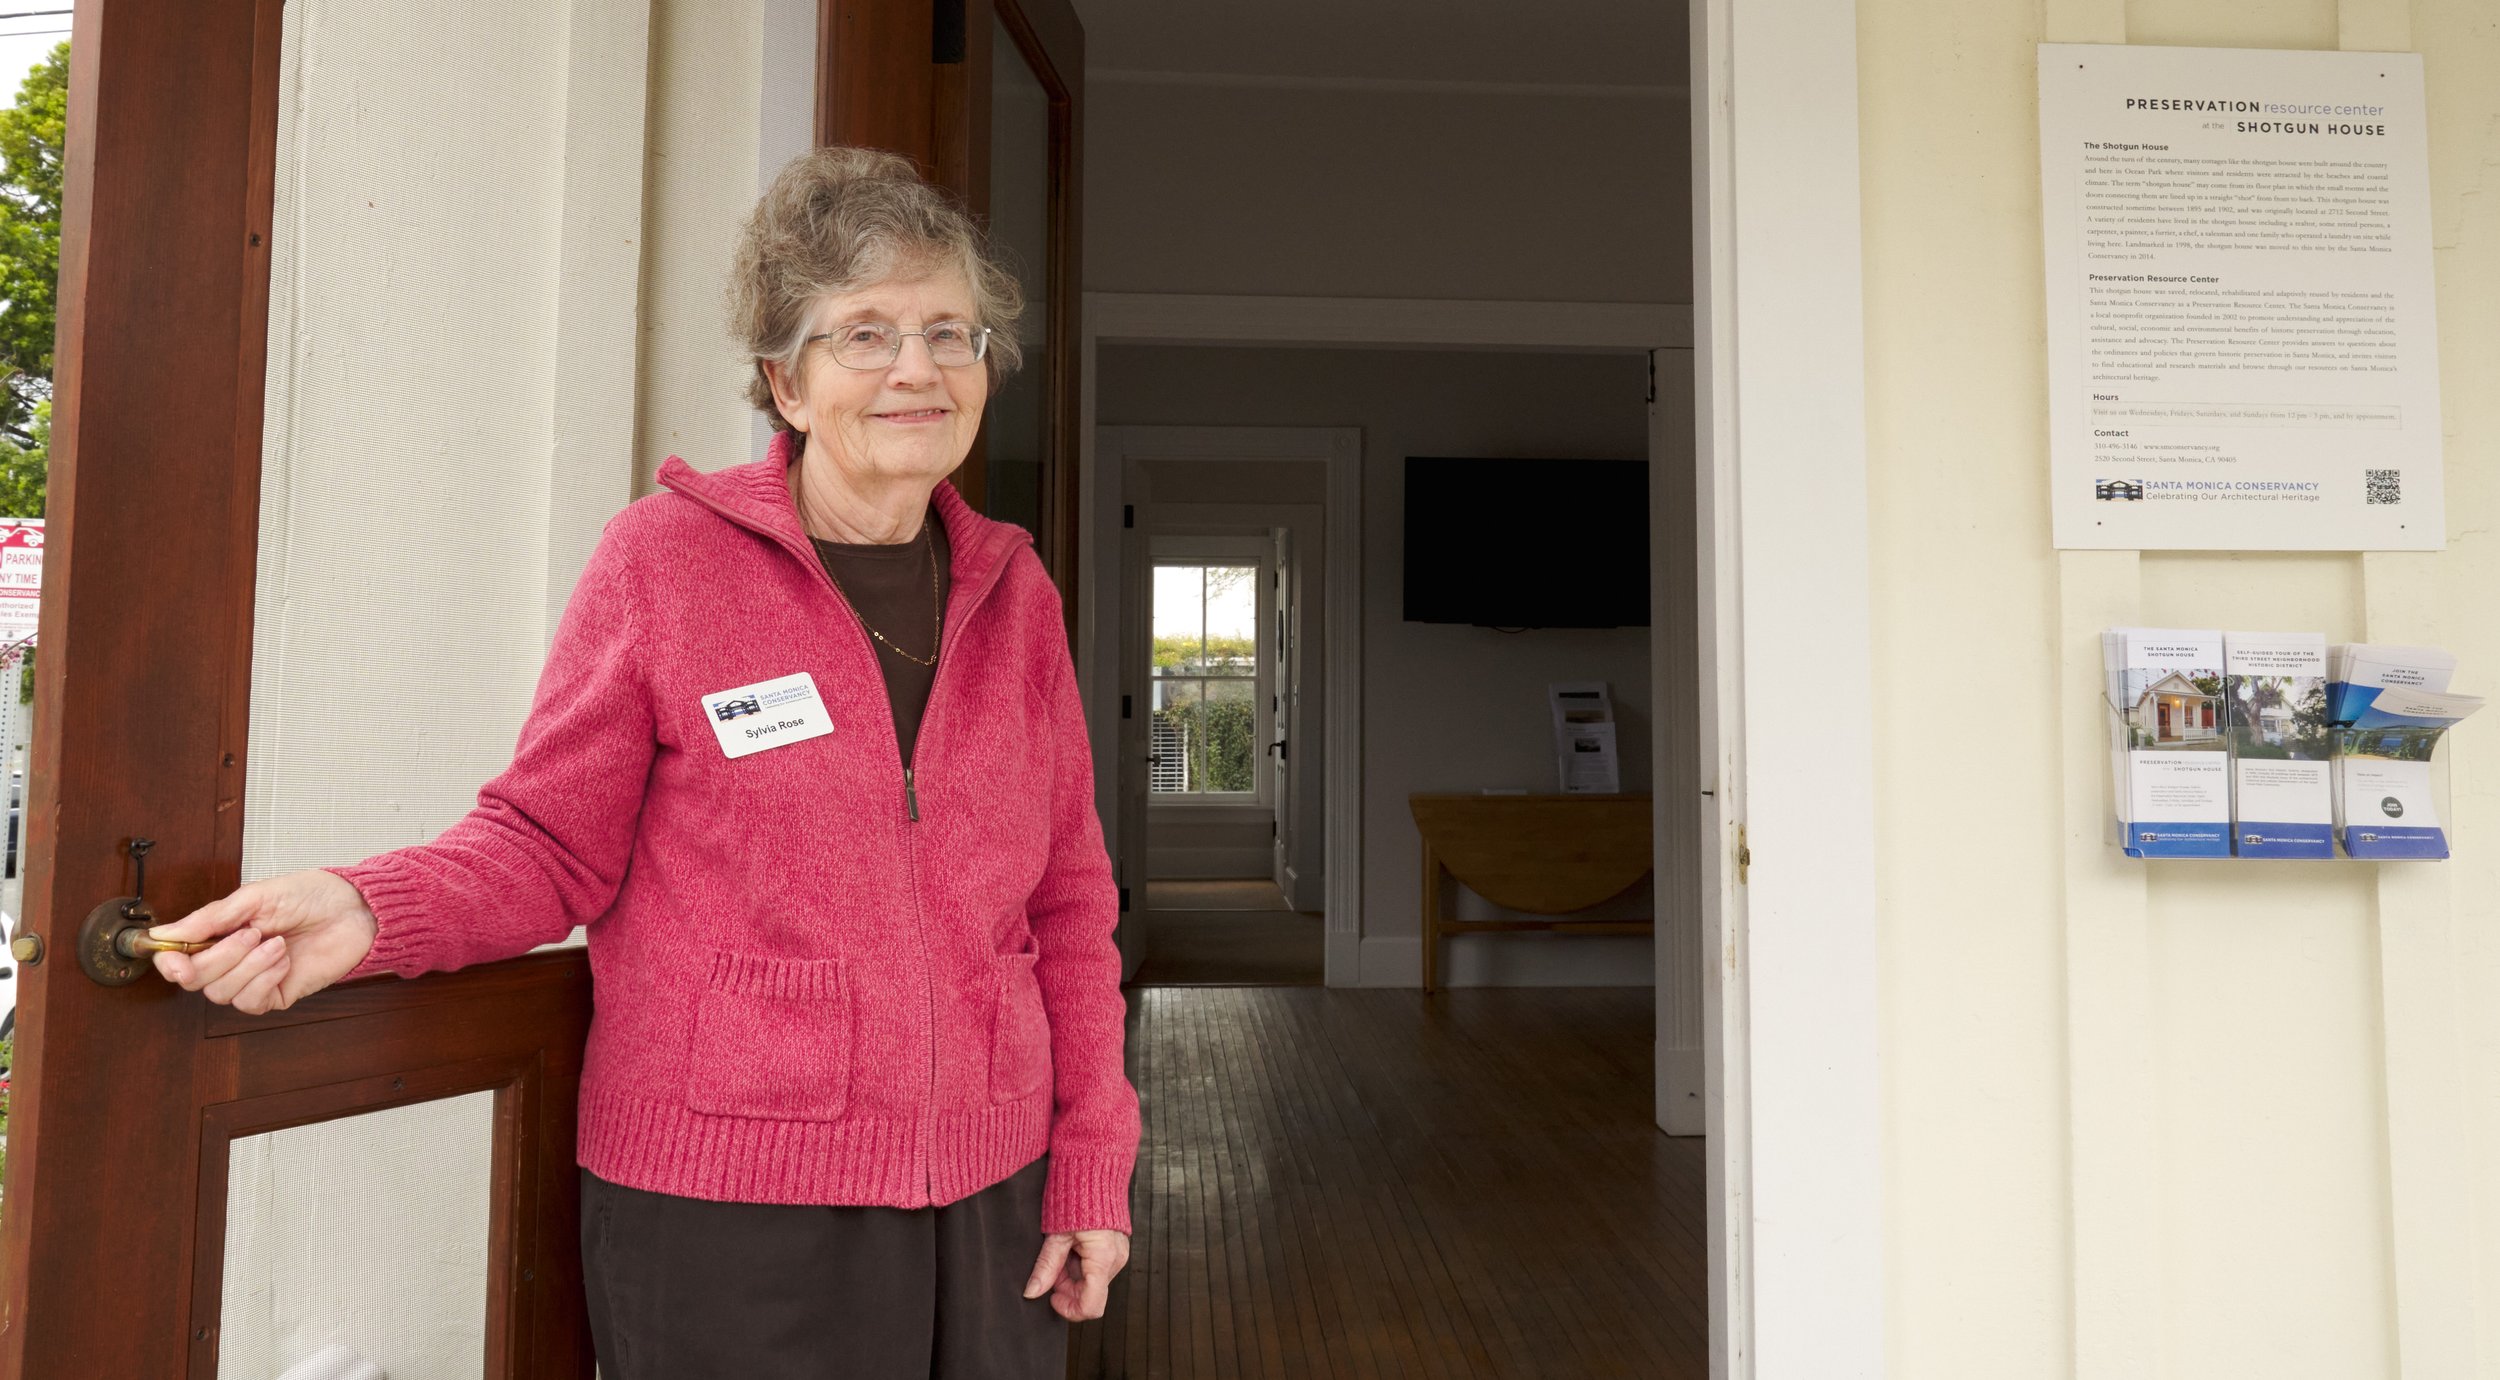  Santa Monica Conservancy Volunteer Docent Sylvia Rose holds the door open to the Preservation Resource Center at the Shotgun House on Wednesday, April 12, 2023, in Santa Monica, Calif. (Nicholas McCall | The Corsair) 